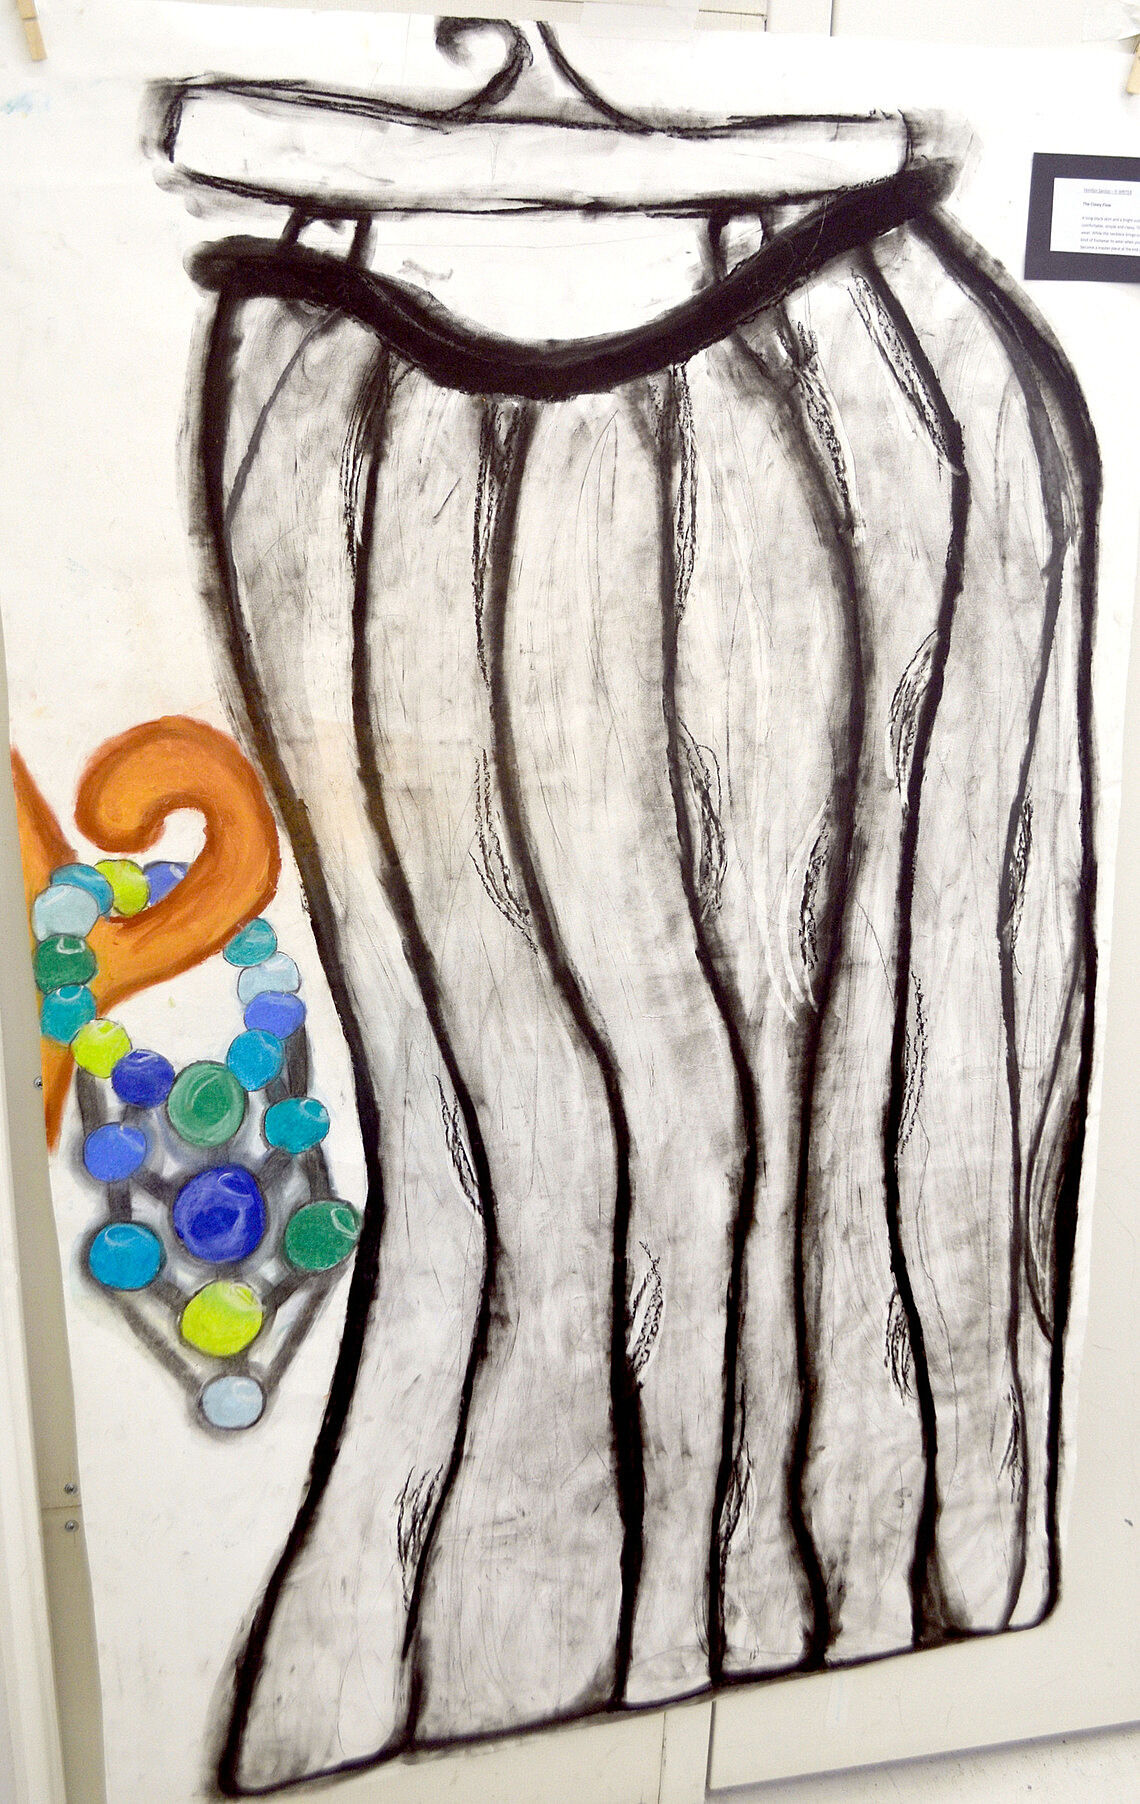 Drawing of a skirt on a hanger.